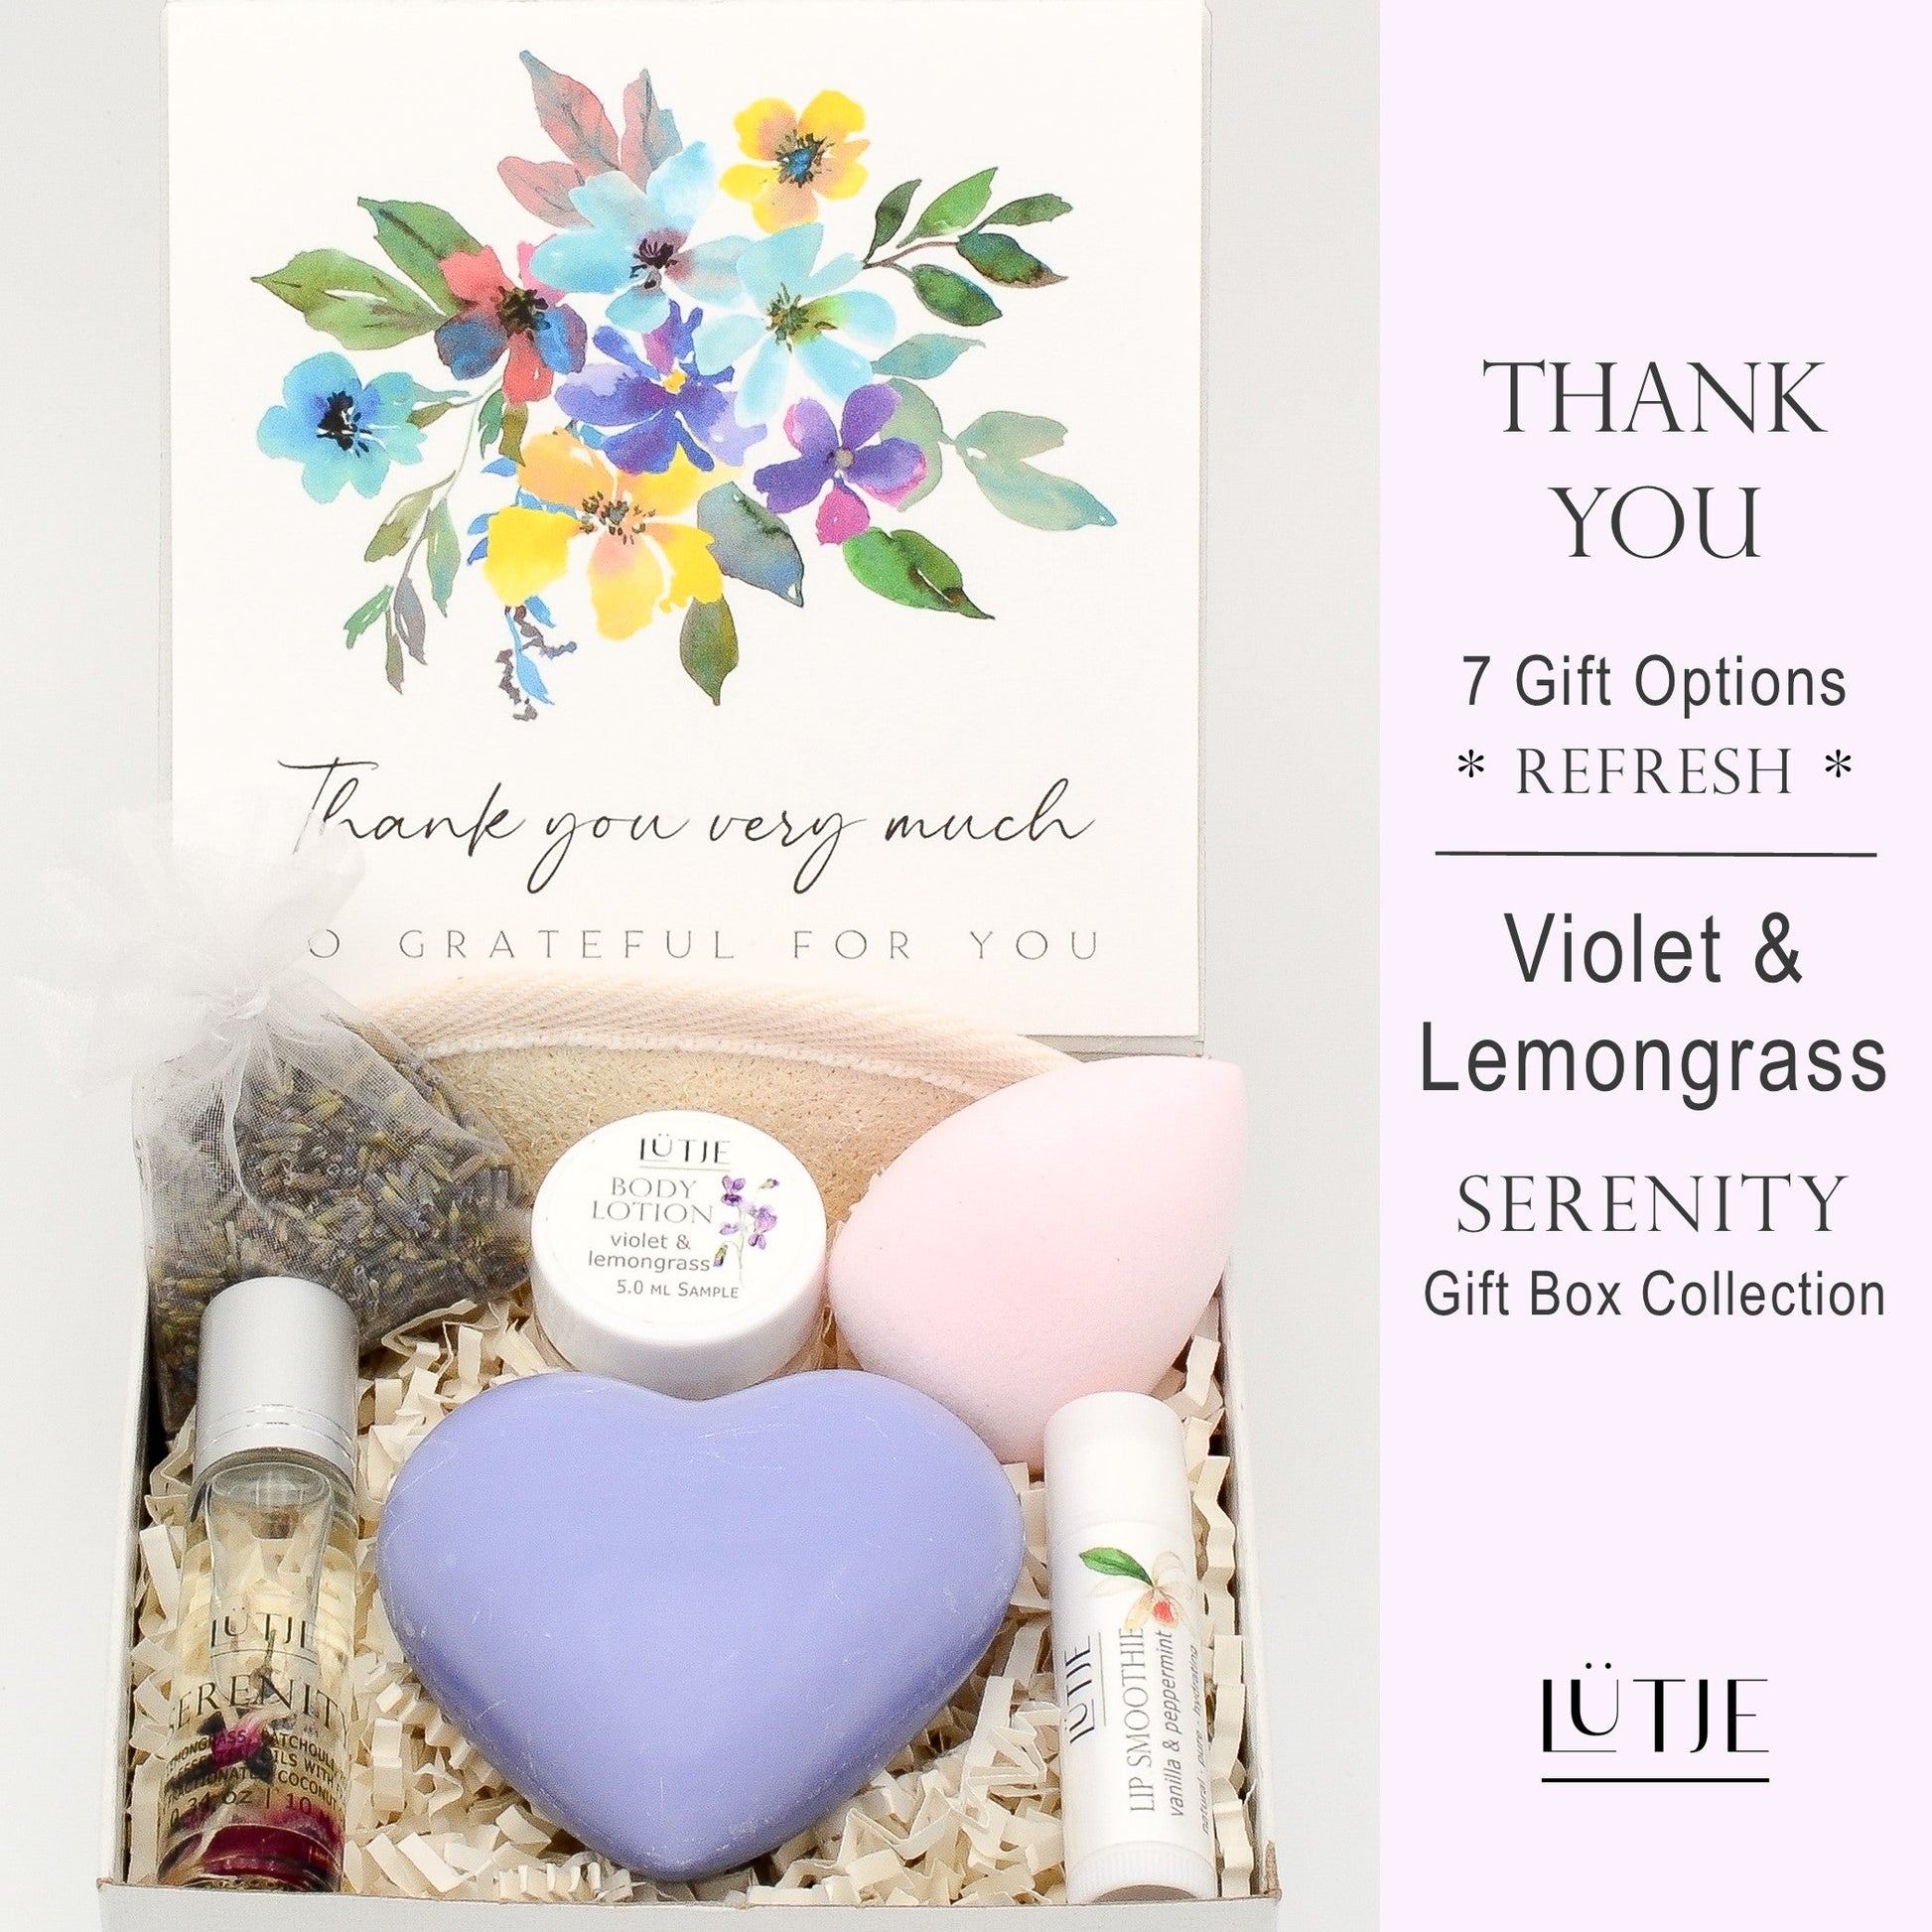 Gift Box for women, wife, daughter, BFF, sister, mom, or grandma, includes Violet & Lemongrass hand lotion spray and body lotion, essential oil, lip balm, soothing muscle balm, Bergamot & Pear room & linen spray, French soap, French bath salts, hydrating face mask, other bath, spa and self-care items, and 18K gold-plated necklace with engraved heart.